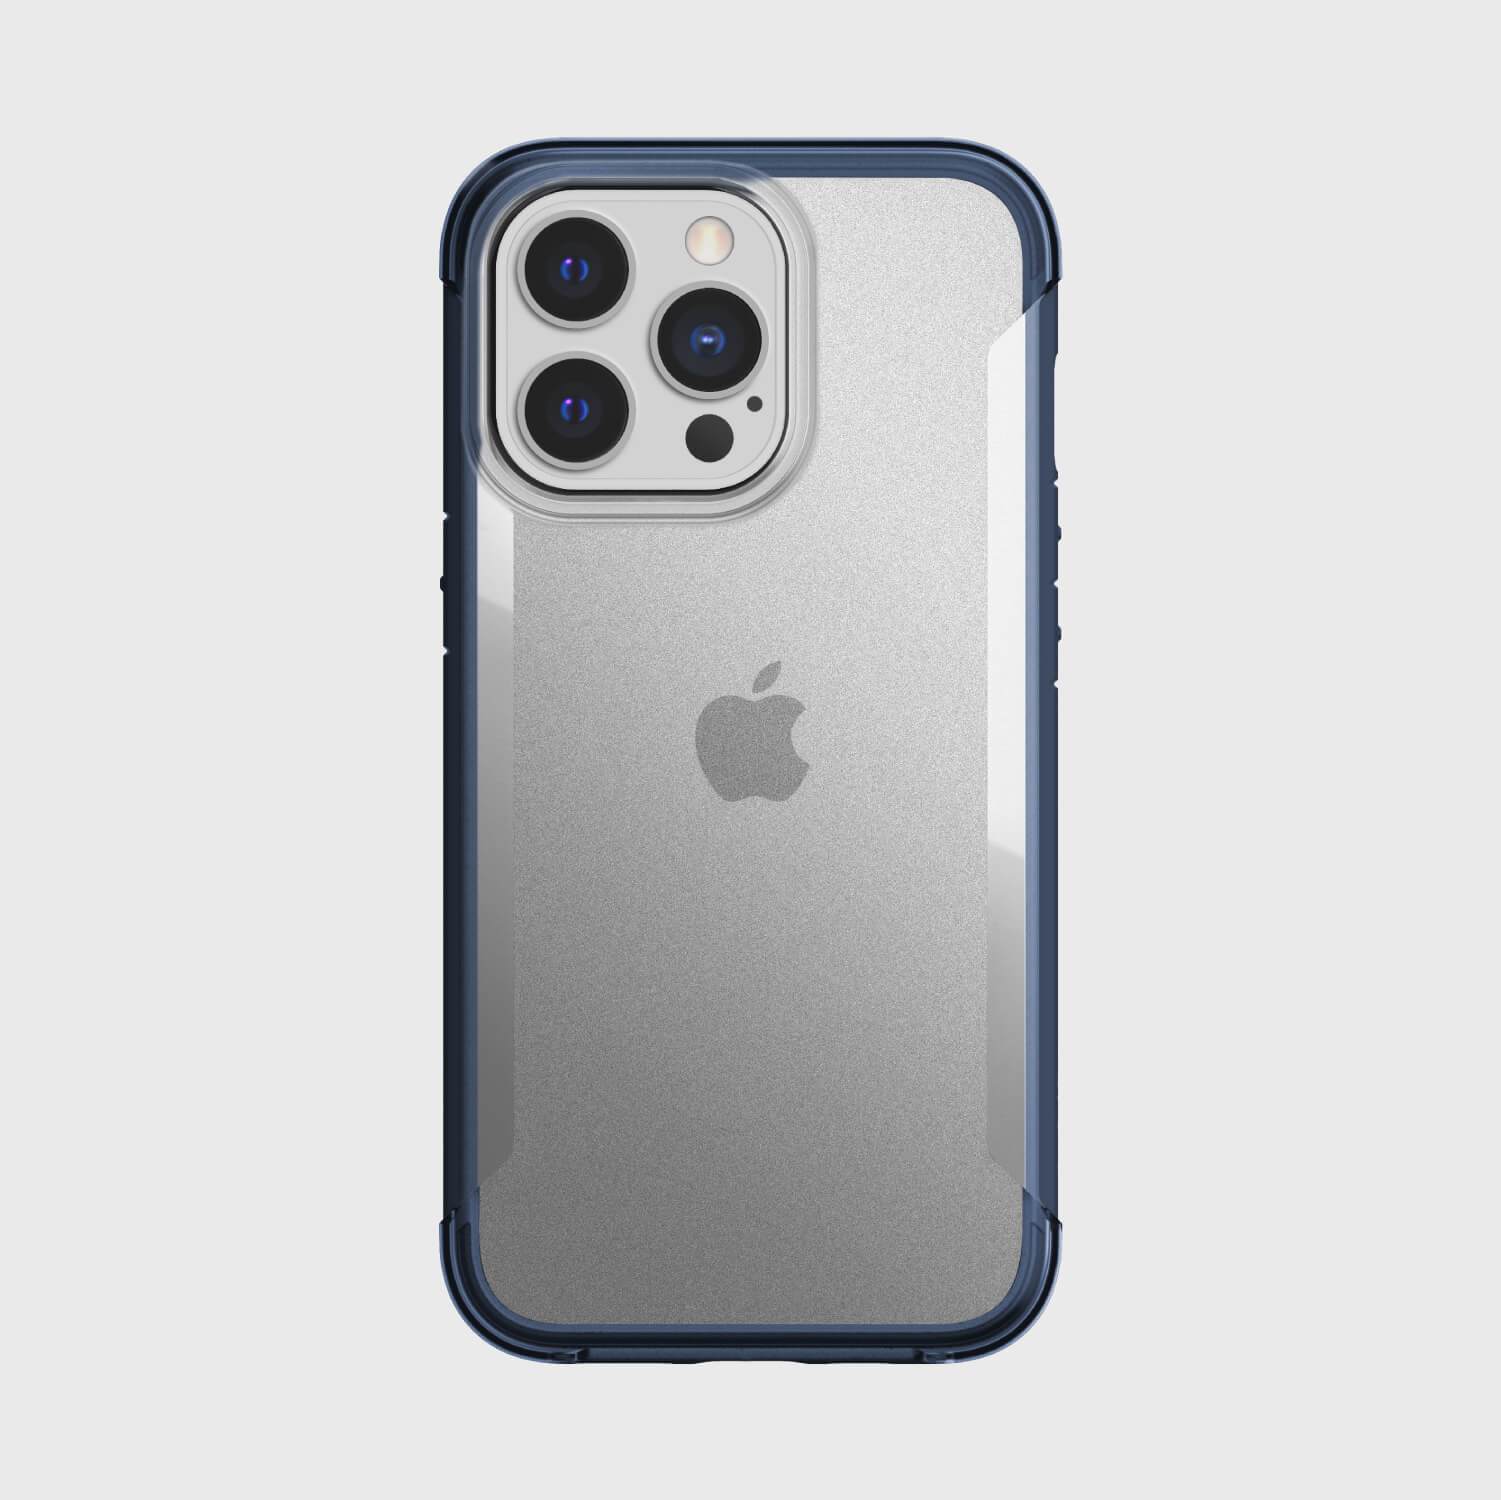 The eco-friendly back view of an iPhone 13 Pro Max Case - TERRAIN in blue, designed to biodegrade rather than contribute to landfill waste. (Brand: Raptic)